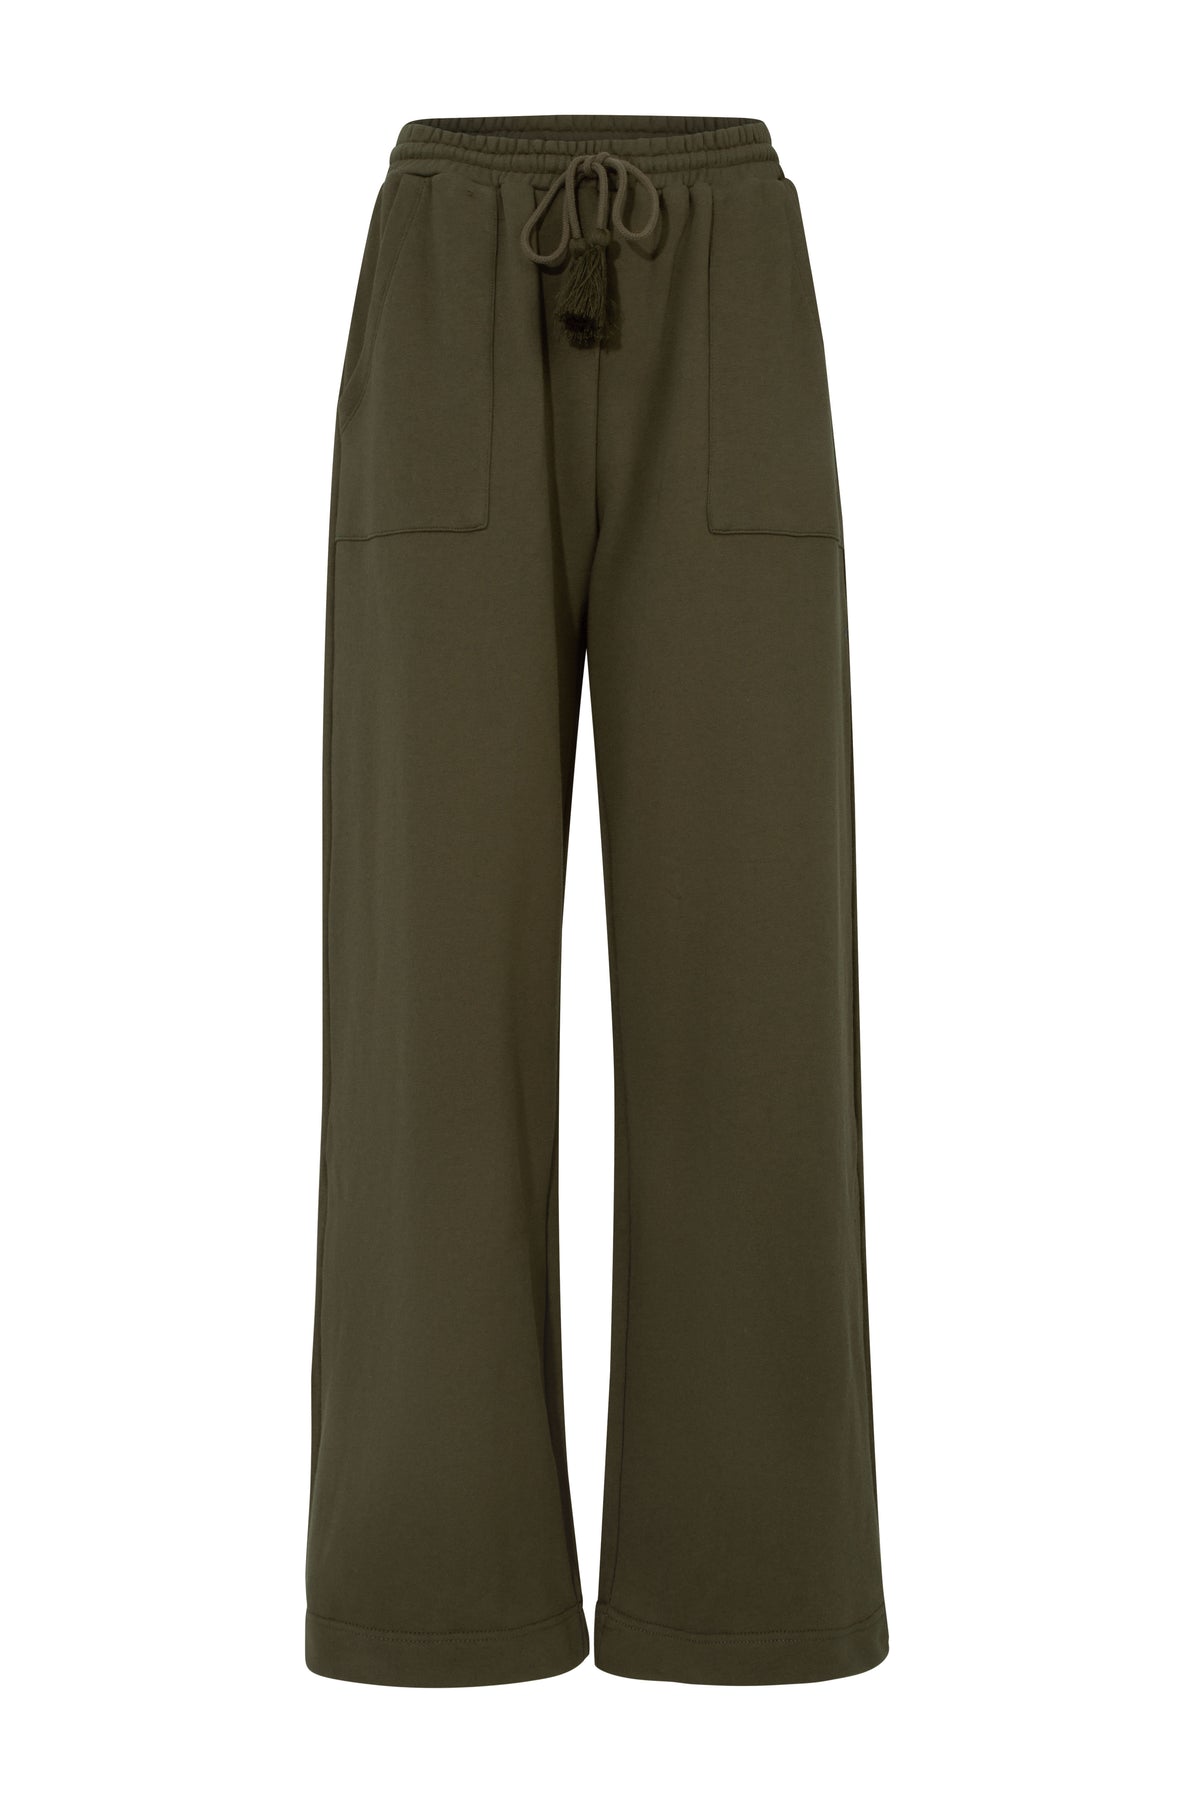 Curate Long Stretch Pant